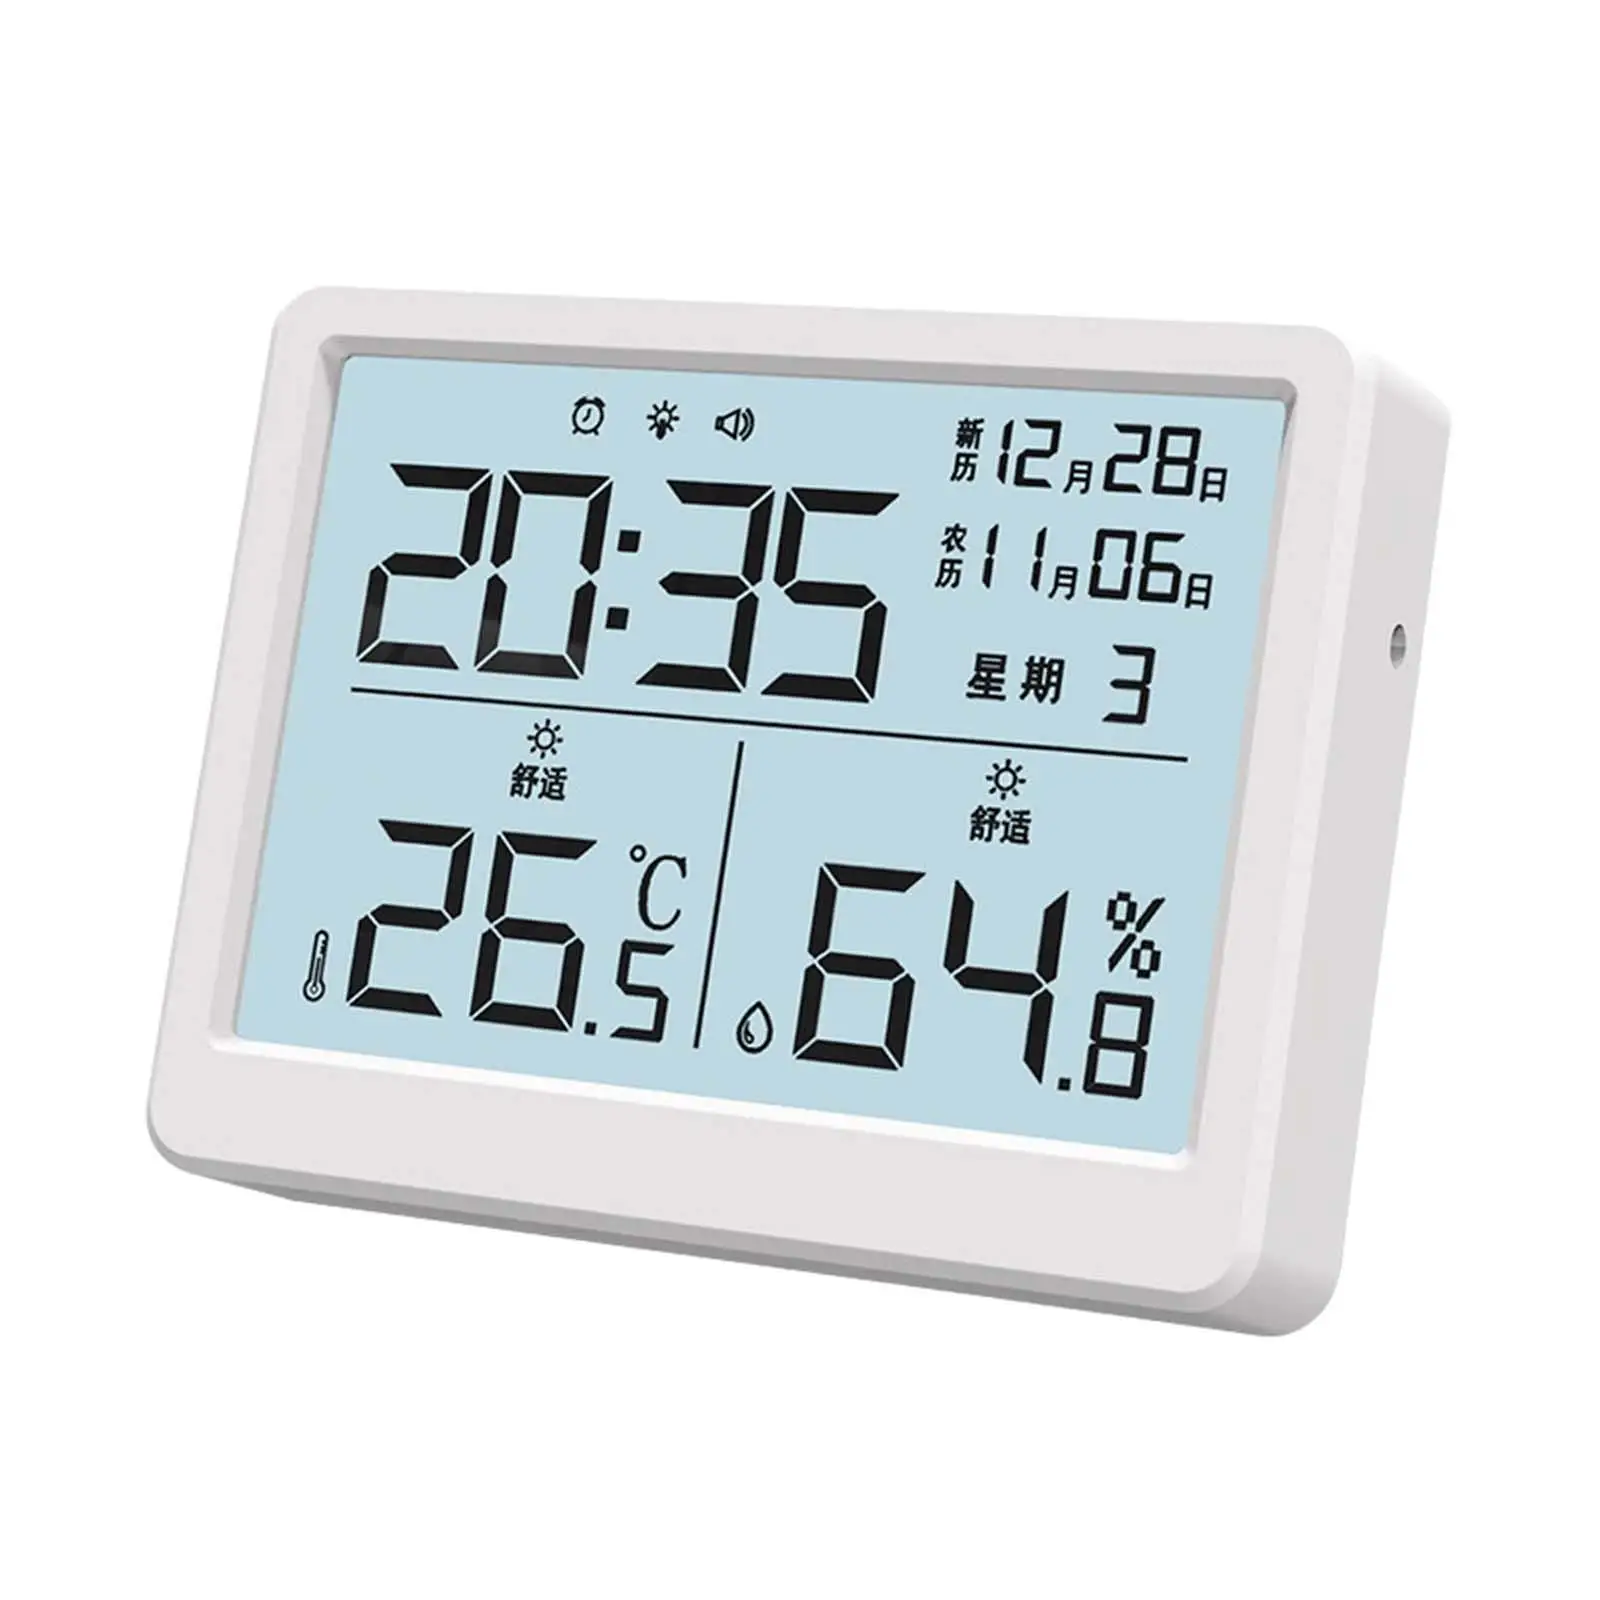 Indoor Hygrometer Wall Clock Weather Station LCD Screen Portable High Precision Easy Read Humidity Meter for Home Office Bedroom